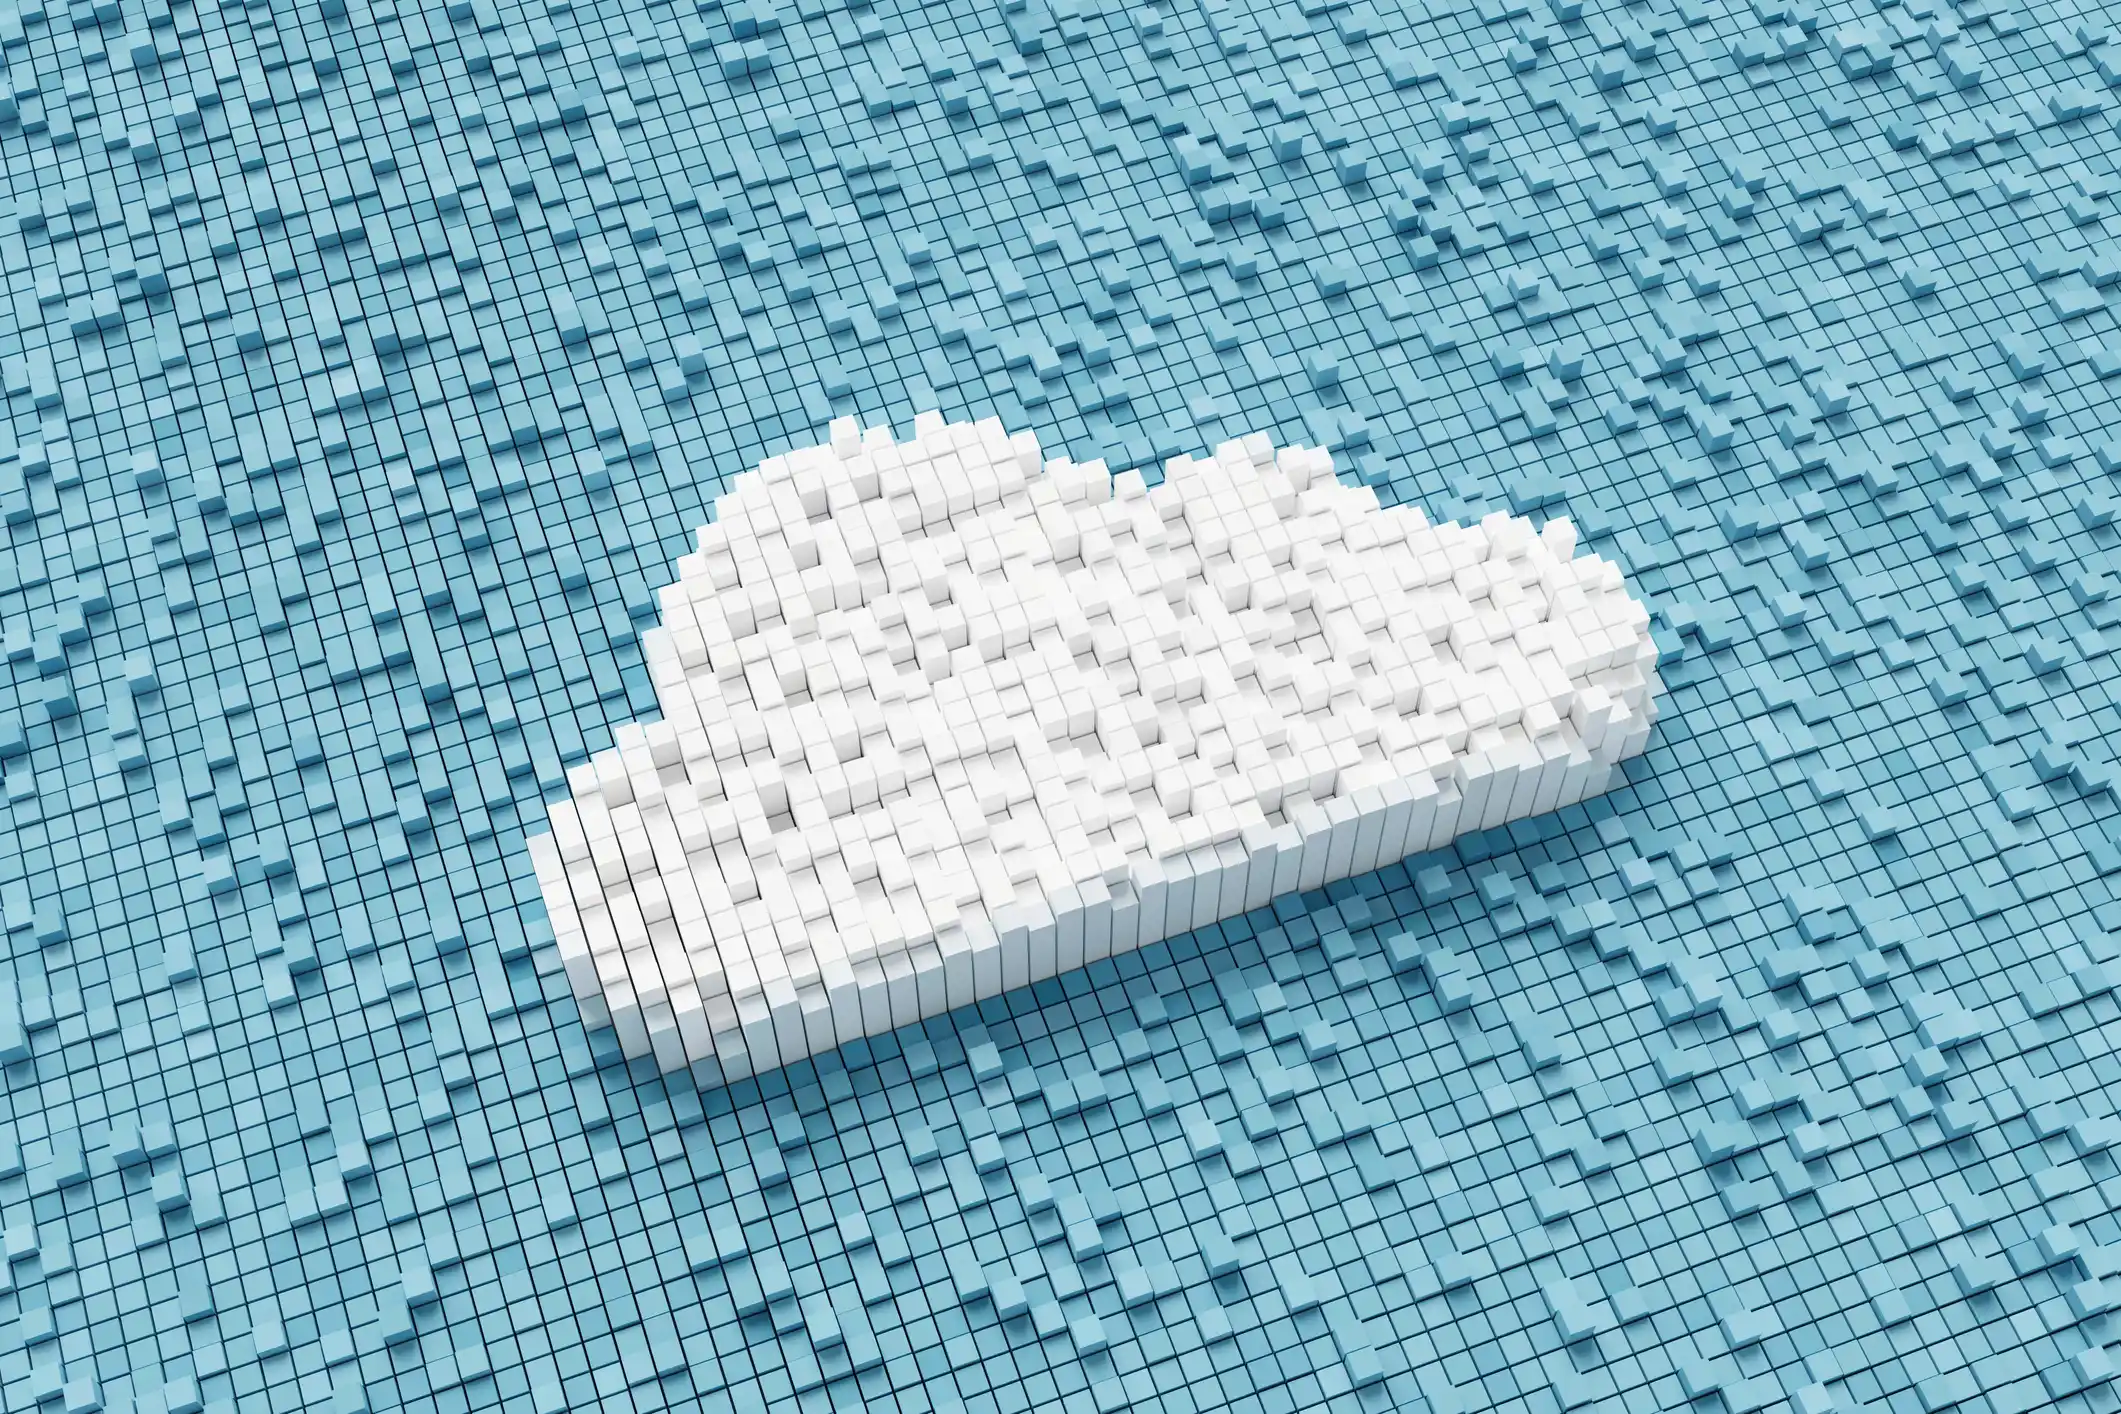 Do You Need To Pay for Cloud Storage Space?